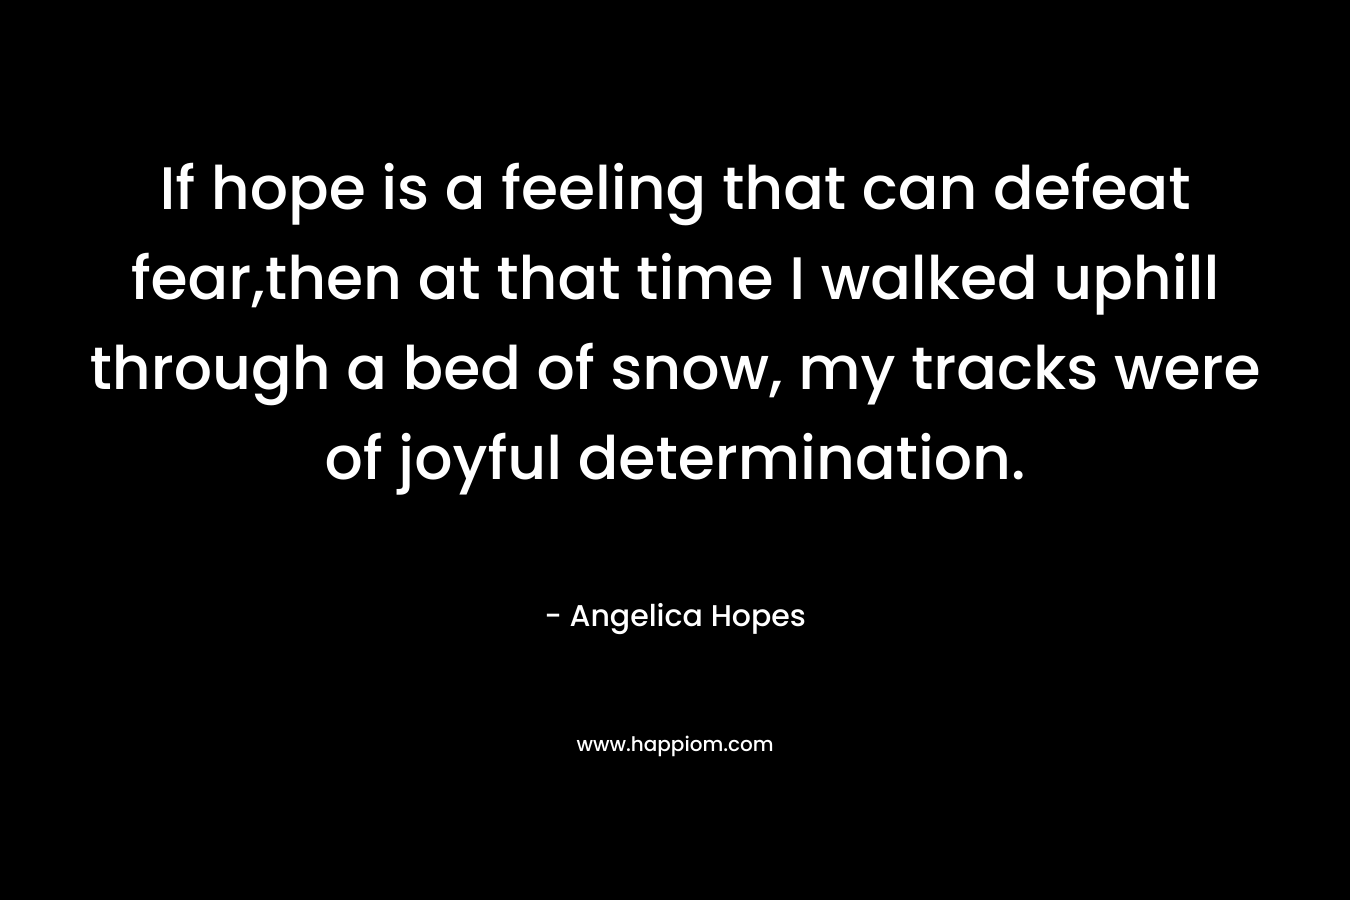 If hope is a feeling that can defeat fear,then at that time I walked uphill through a bed of snow, my tracks were of joyful determination.